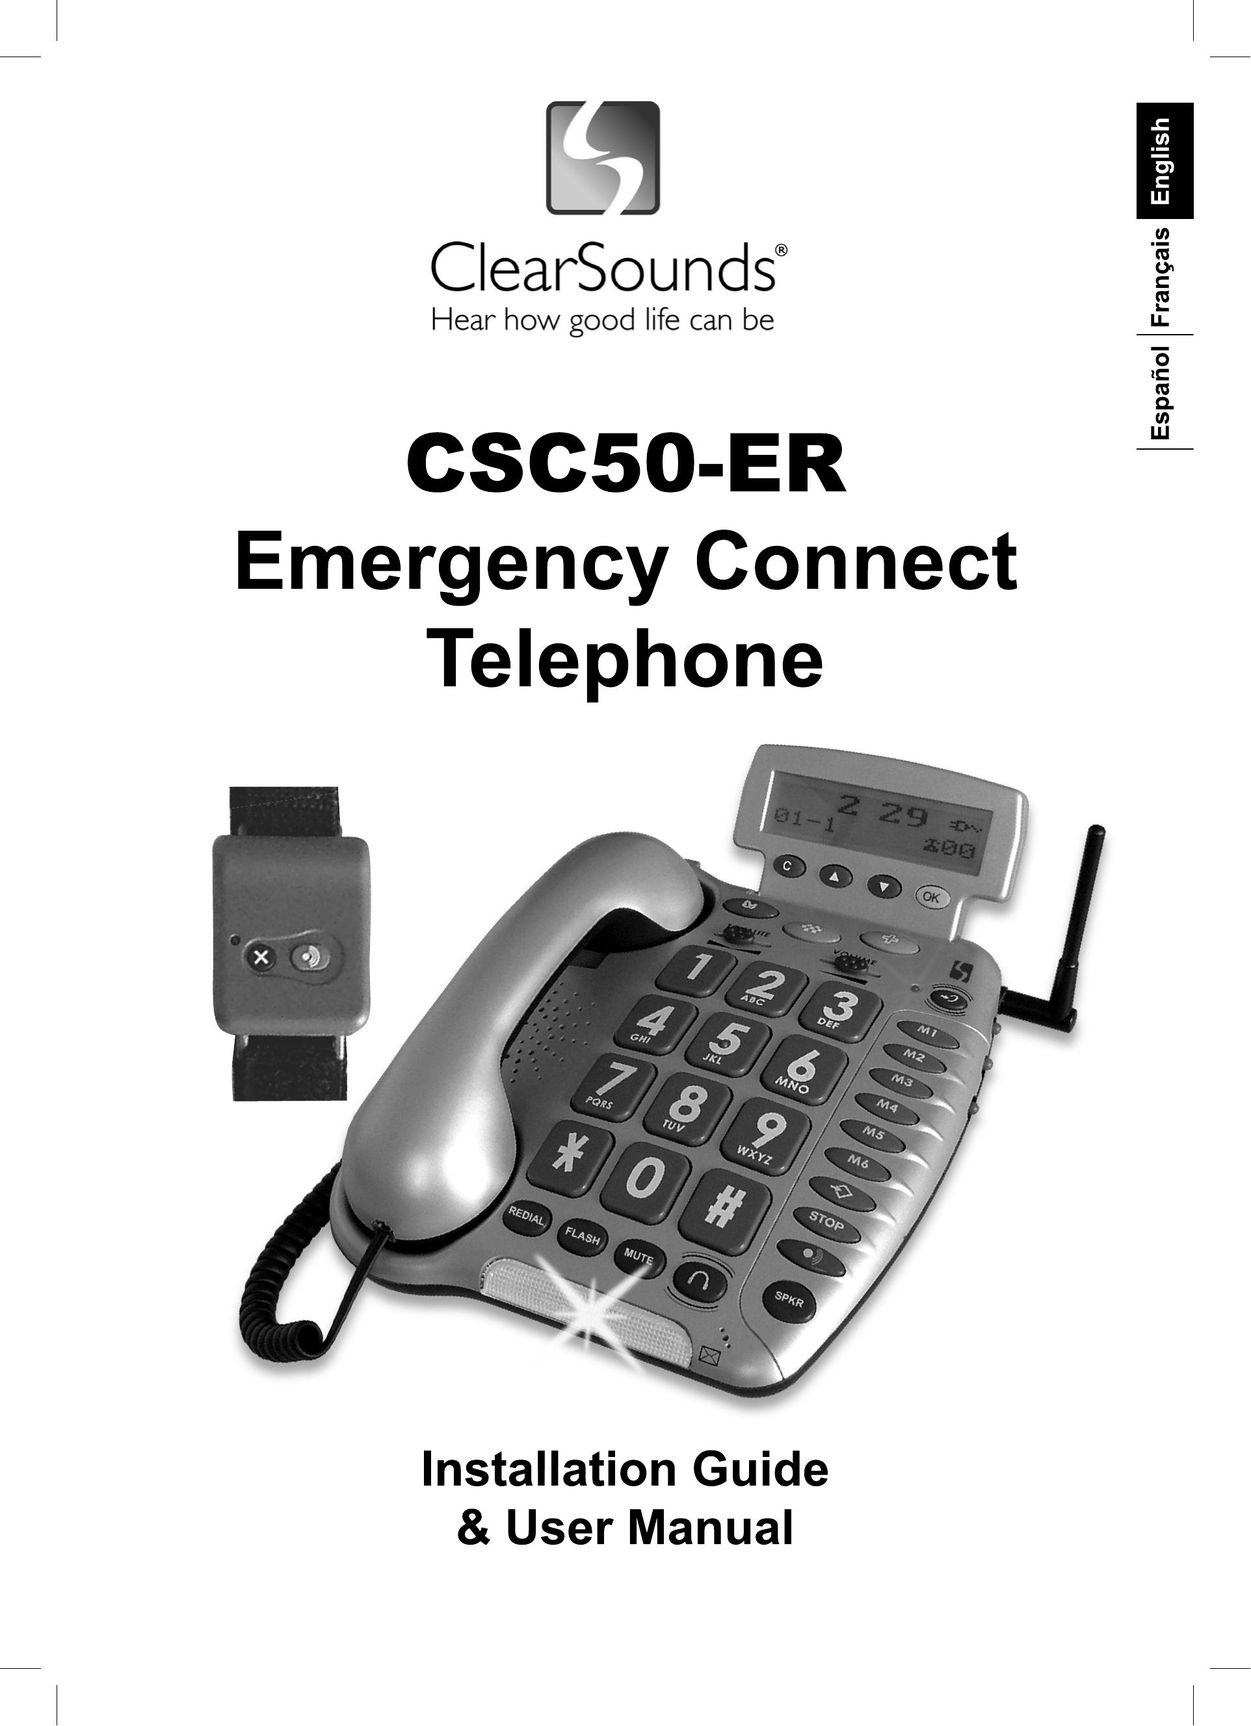 ClearSounds CSC50-ER Telephone User Manual